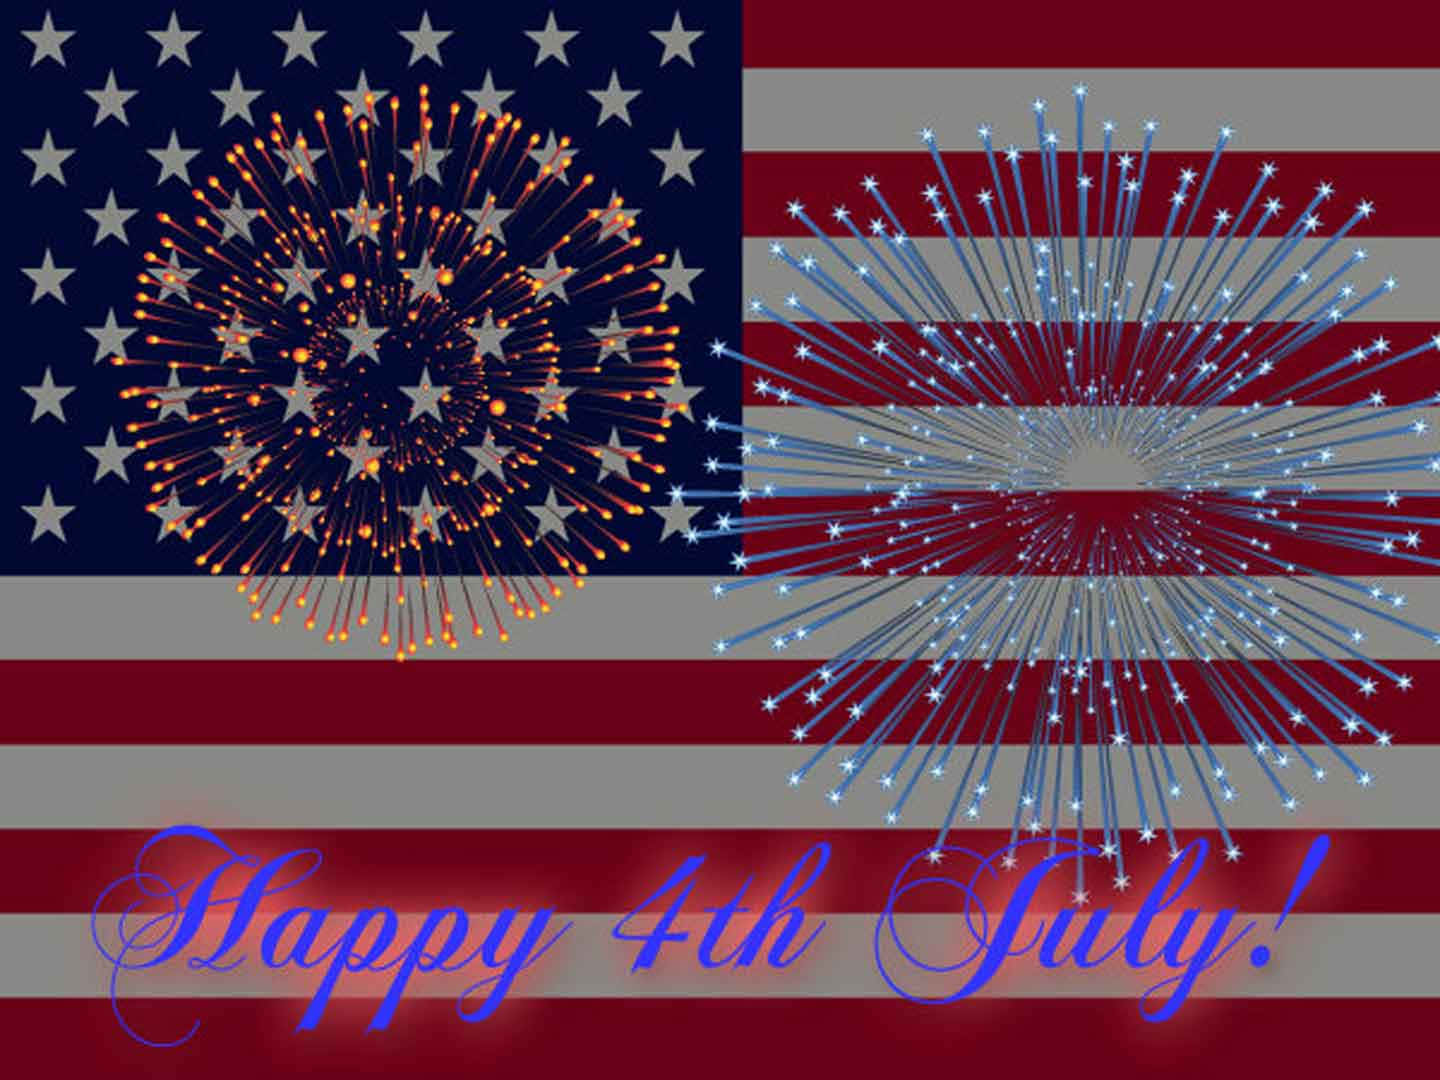 "Make the 4th of July extra cute with this festive background"